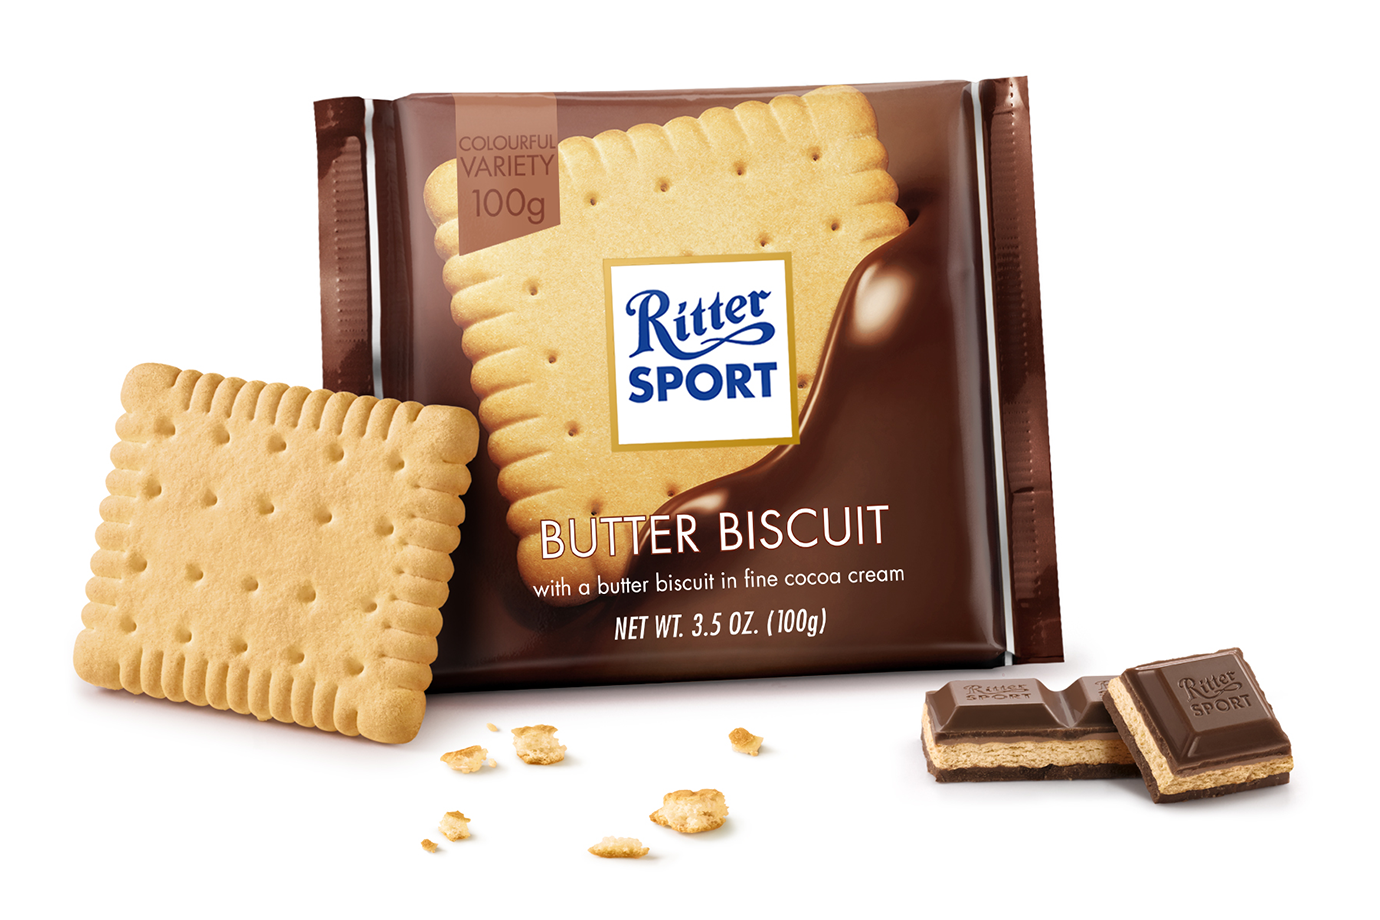 Rittersport Butter Biscuit 